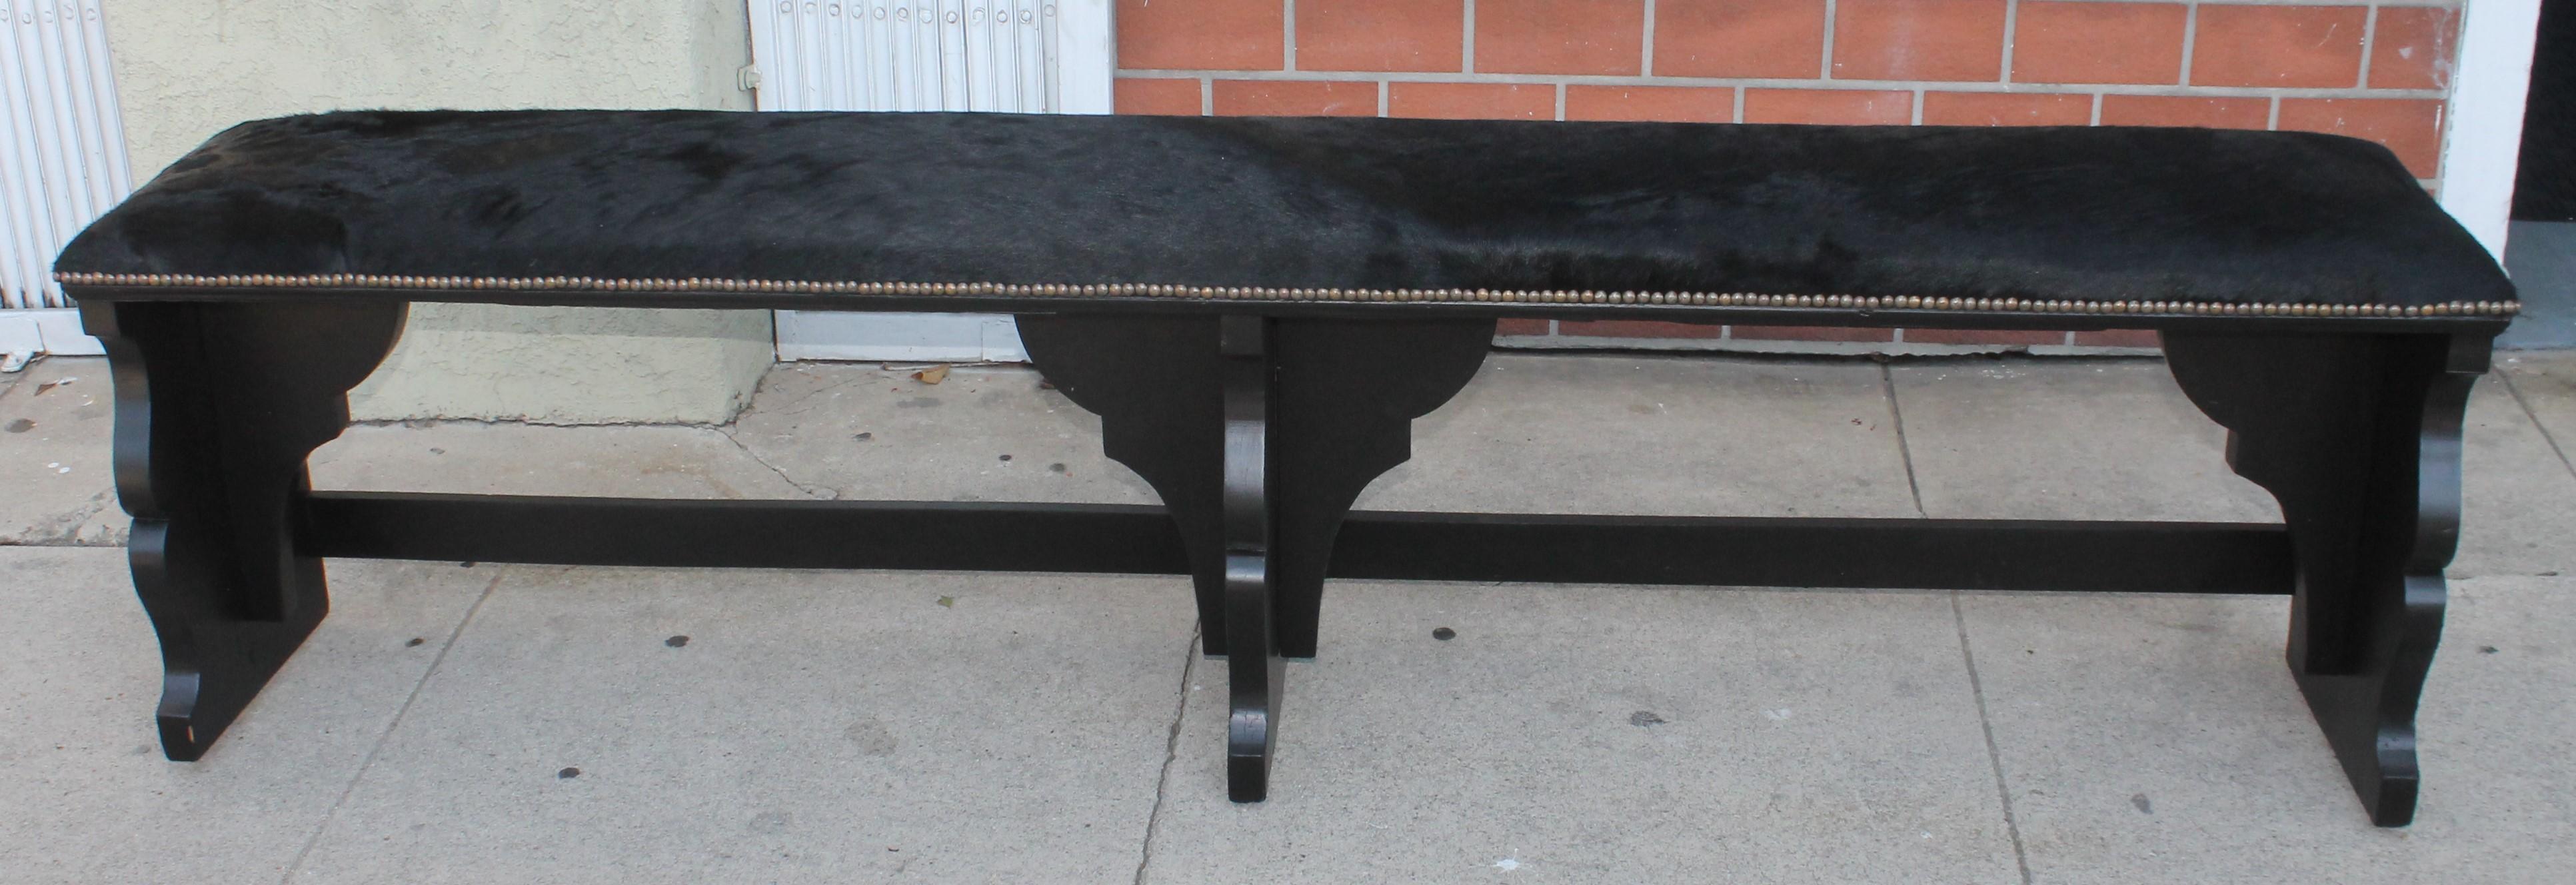 Late 19th Century  Pair of 19th Century Rustic Black Painted Cowhide Benches